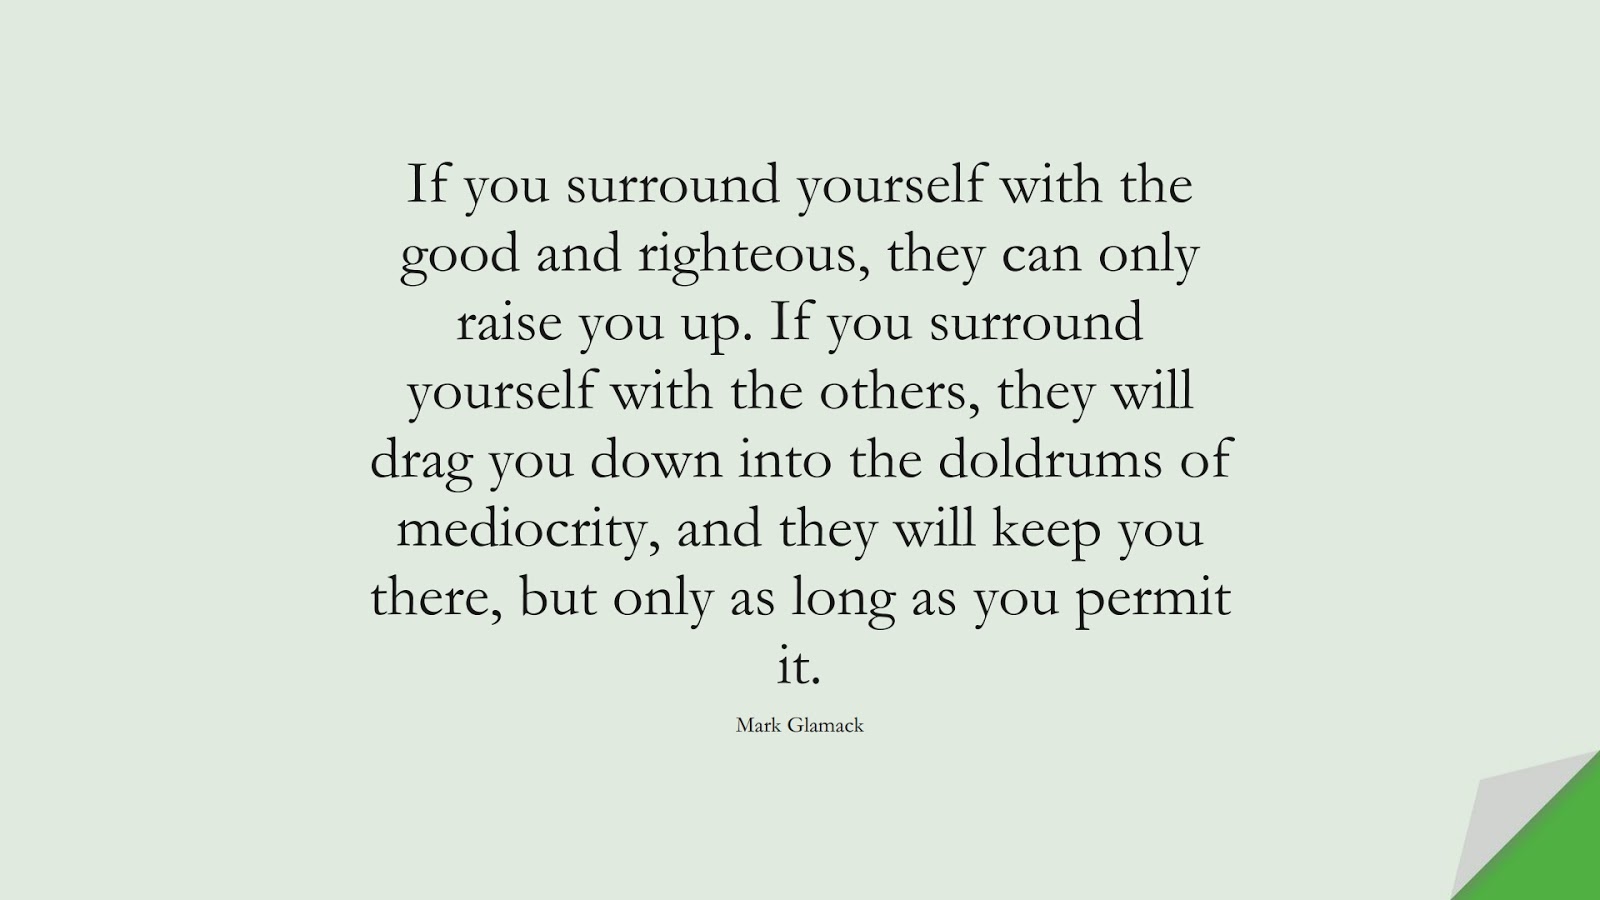 If you surround yourself with the good and righteous, they can only raise you up. If you surround yourself with the others, they will drag you down into the doldrums of mediocrity, and they will keep you there, but only as long as you permit it. (Mark Glamack);  #FamilyQuotes